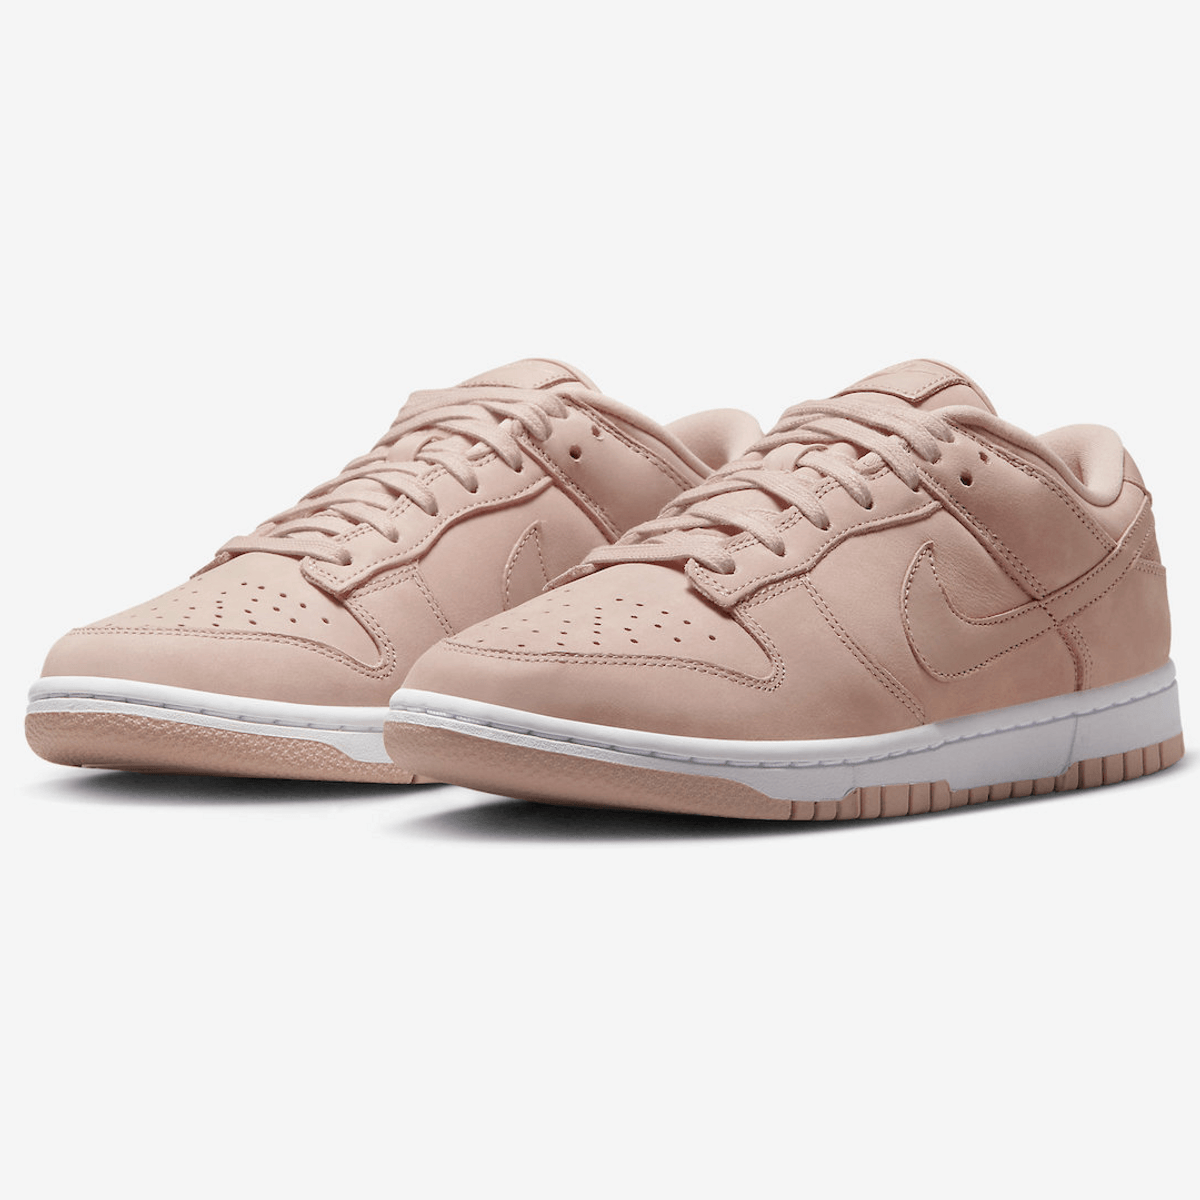 Nike Dunk PRM Line Keeps Rolling With The Soft Pink